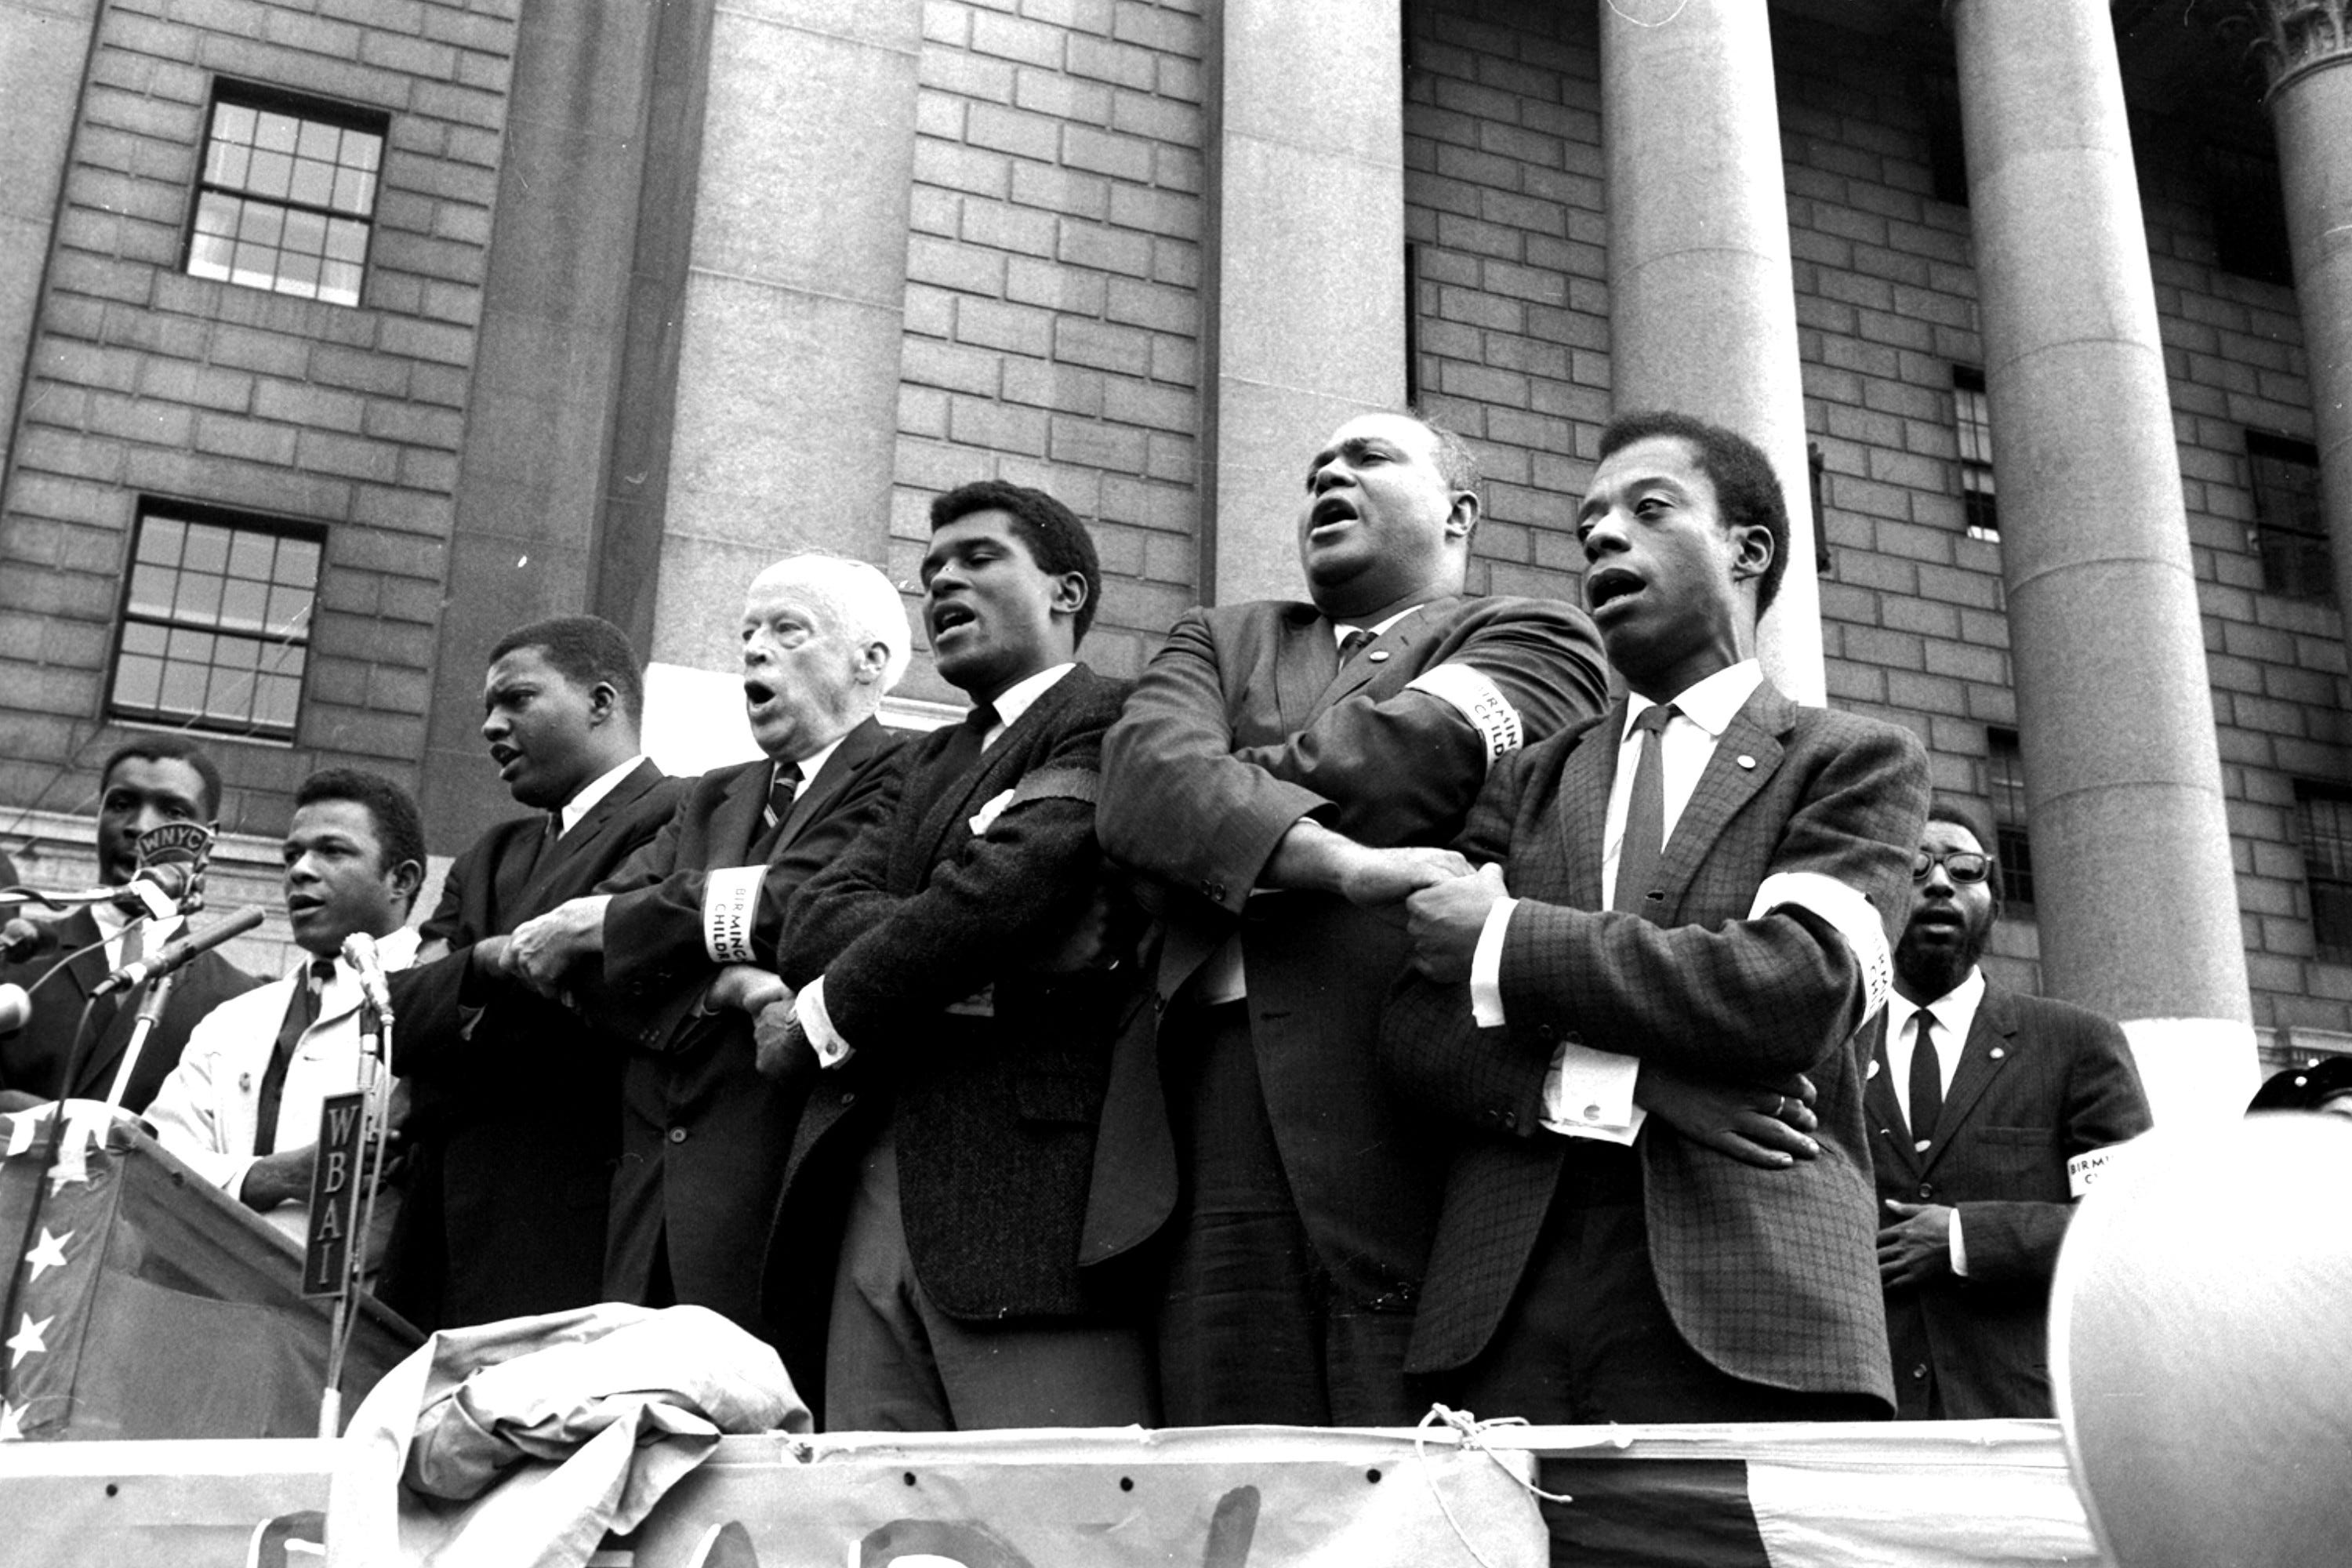 Civil rights leaders clasp hands as they sing during the closing of memorial ceremonies in New York, Sept. 22, 1963, for four girls killed in the bombing of the Birmingham, Ala., Sixteenth Street Baptist Church.  From right, are: author James Baldwin; James Farmer, president of the Congress of Racial Equality; unidentified man; and veteran Socialist leader Norman Thomas.  At a rally on Foley Square, Farmer charged the U.S. Department of Justice and President Kennedy with a share of the blame in the Sept. 15, bombing, and Thomas said he was "ashamed that I was a white American,  when the bombing took place."